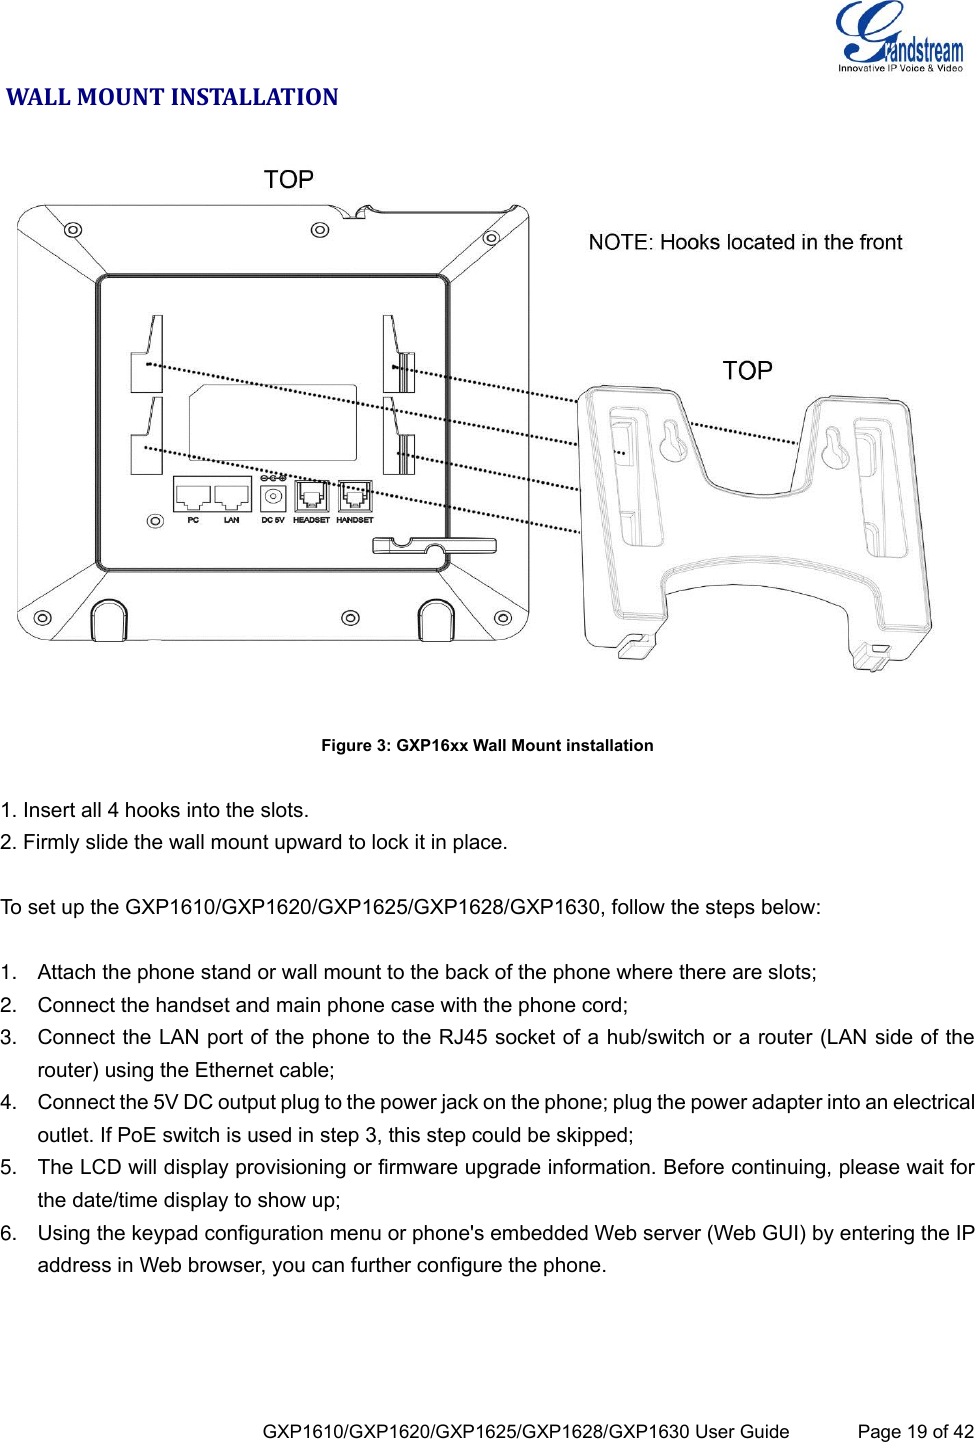  GXP1610/GXP1620/GXP1625/GXP1628/GXP1630 User Guide             Page 19 of 42  WALL MOUNT INSTALLATION  Figure 3: GXP16xx Wall Mount installation  1. Insert all 4 hooks into the slots. 2. Firmly slide the wall mount upward to lock it in place.  To set up the GXP1610/GXP1620/GXP1625/GXP1628/GXP1630, follow the steps below:  1. Attach the phone stand or wall mount to the back of the phone where there are slots; 2. Connect the handset and main phone case with the phone cord; 3. Connect the LAN port of the phone to the RJ45 socket of a hub/switch or a router (LAN side of the router) using the Ethernet cable; 4. Connect the 5V DC output plug to the power jack on the phone; plug the power adapter into an electrical outlet. If PoE switch is used in step 3, this step could be skipped; 5. The LCD will display provisioning or firmware upgrade information. Before continuing, please wait for the date/time display to show up; 6. Using the keypad configuration menu or phone&apos;s embedded Web server (Web GUI) by entering the IP address in Web browser, you can further configure the phone.  